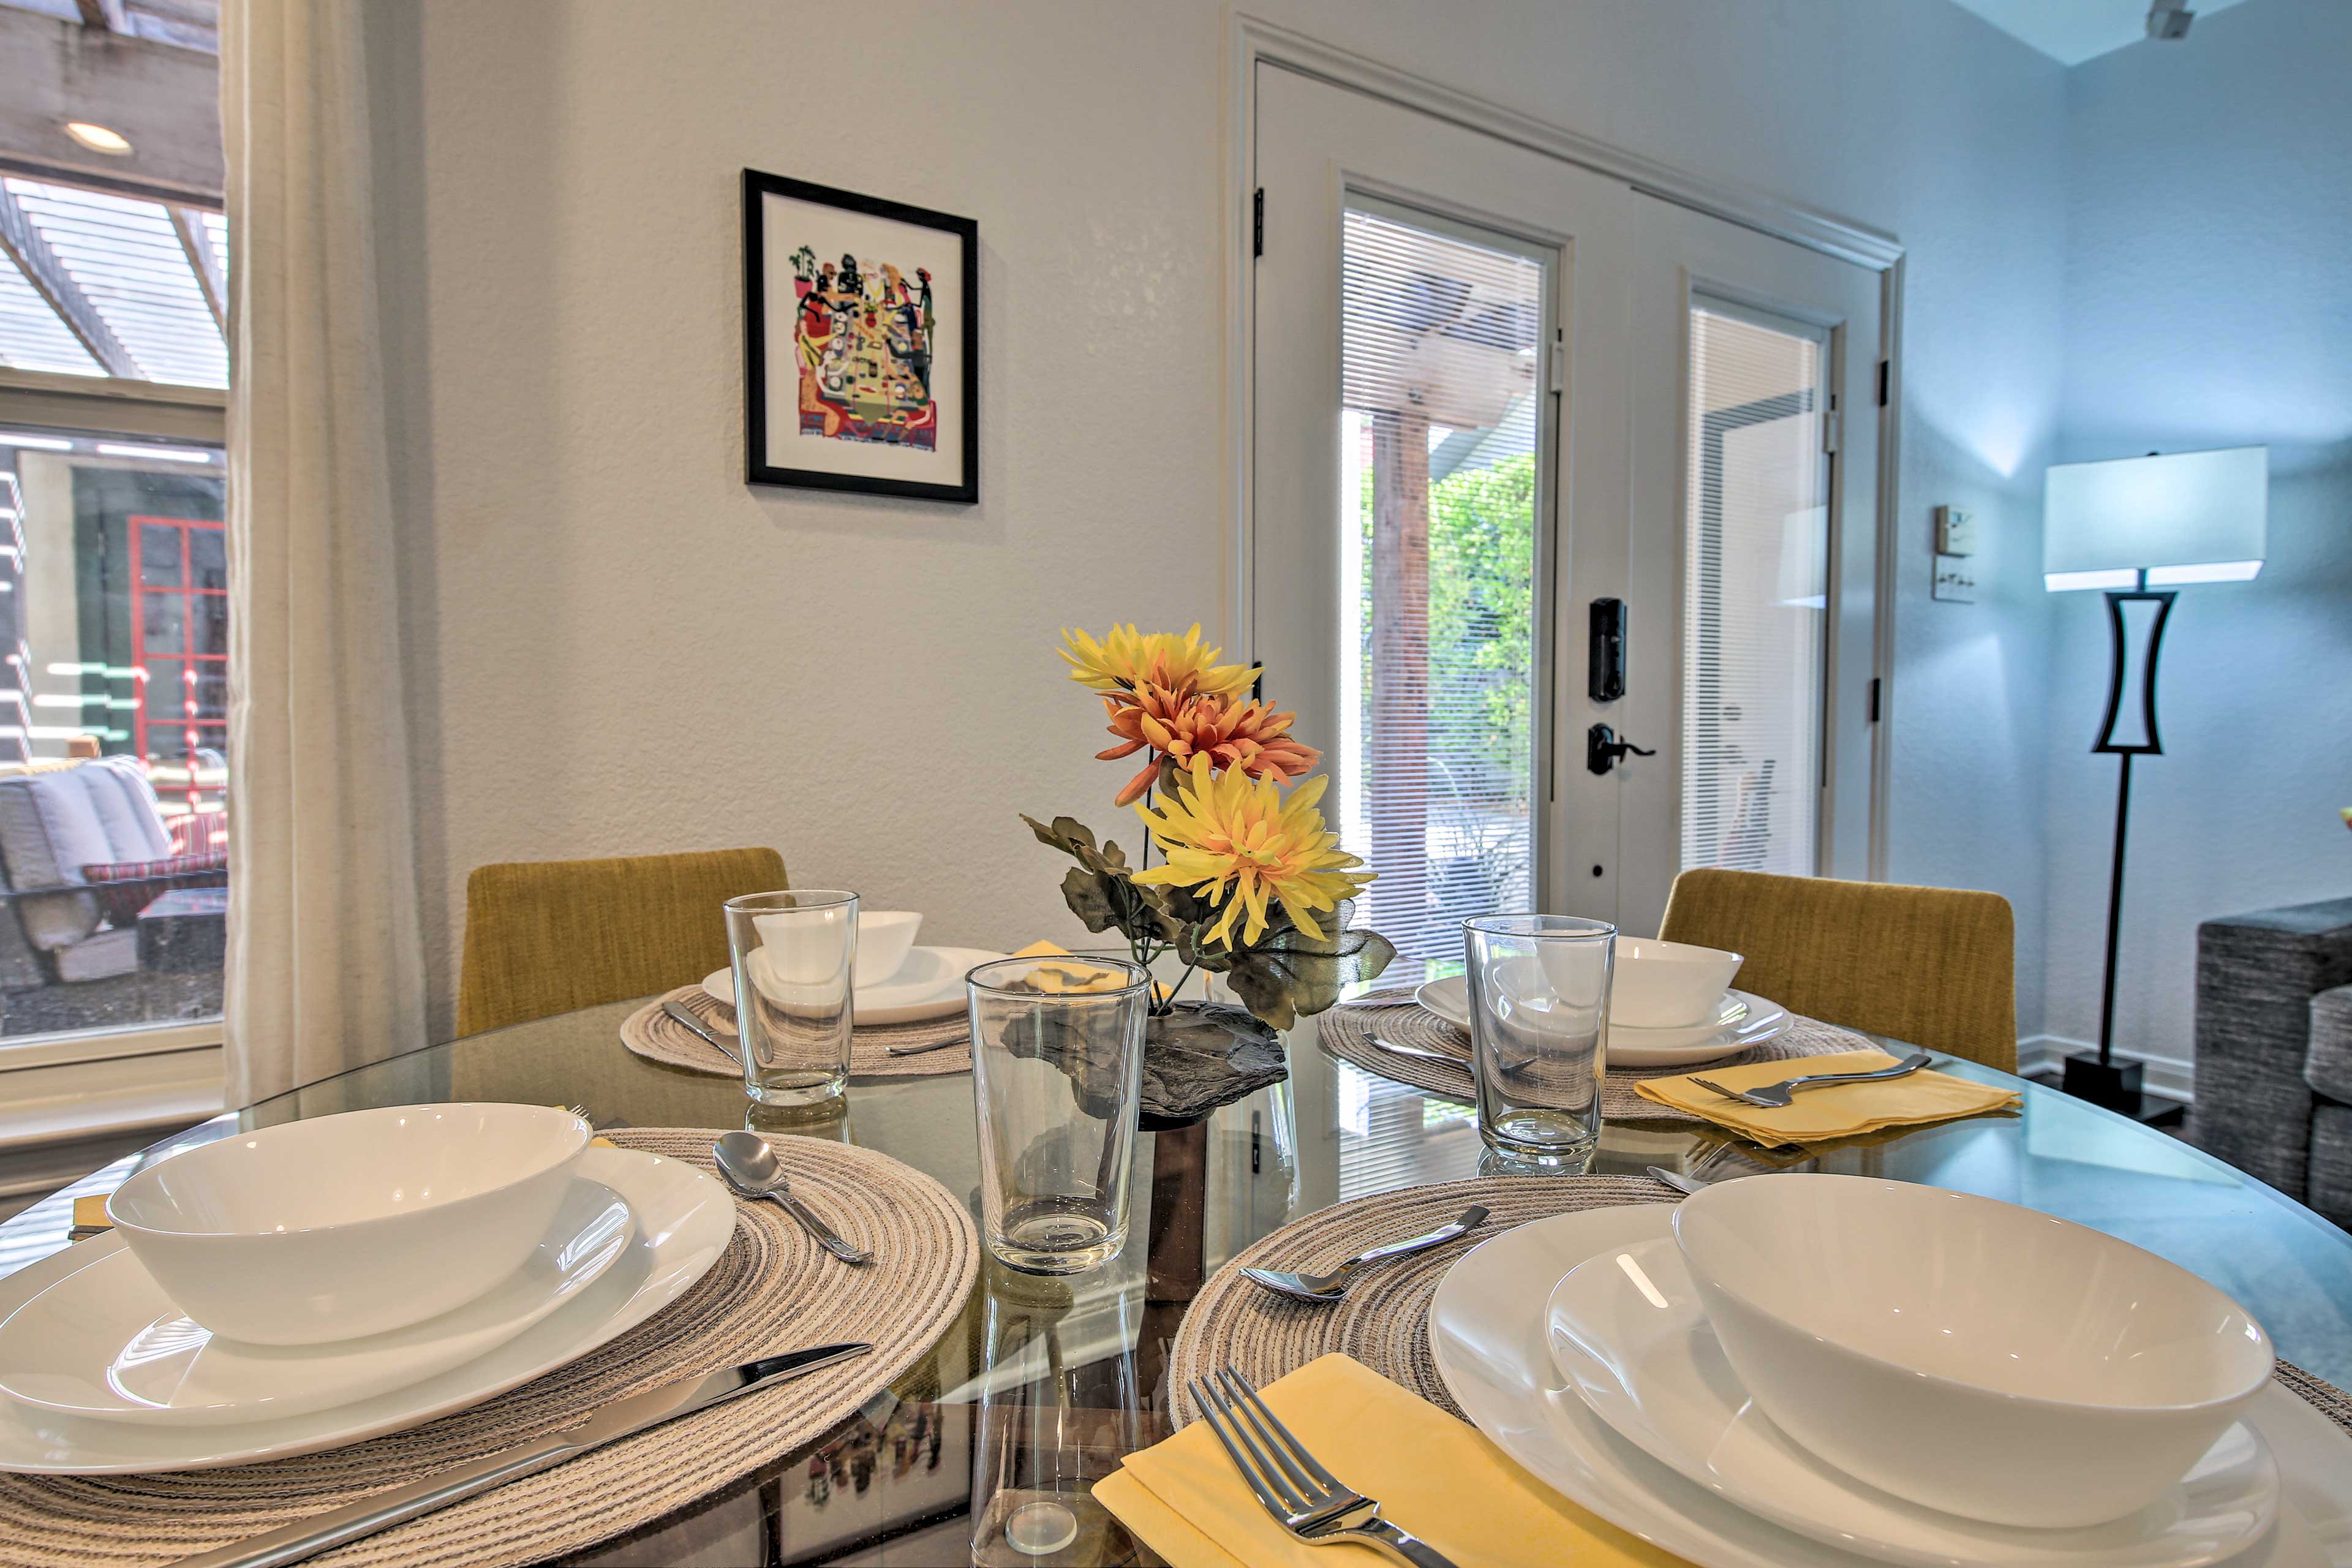 Set the table to share a delicious home-cooked meal.